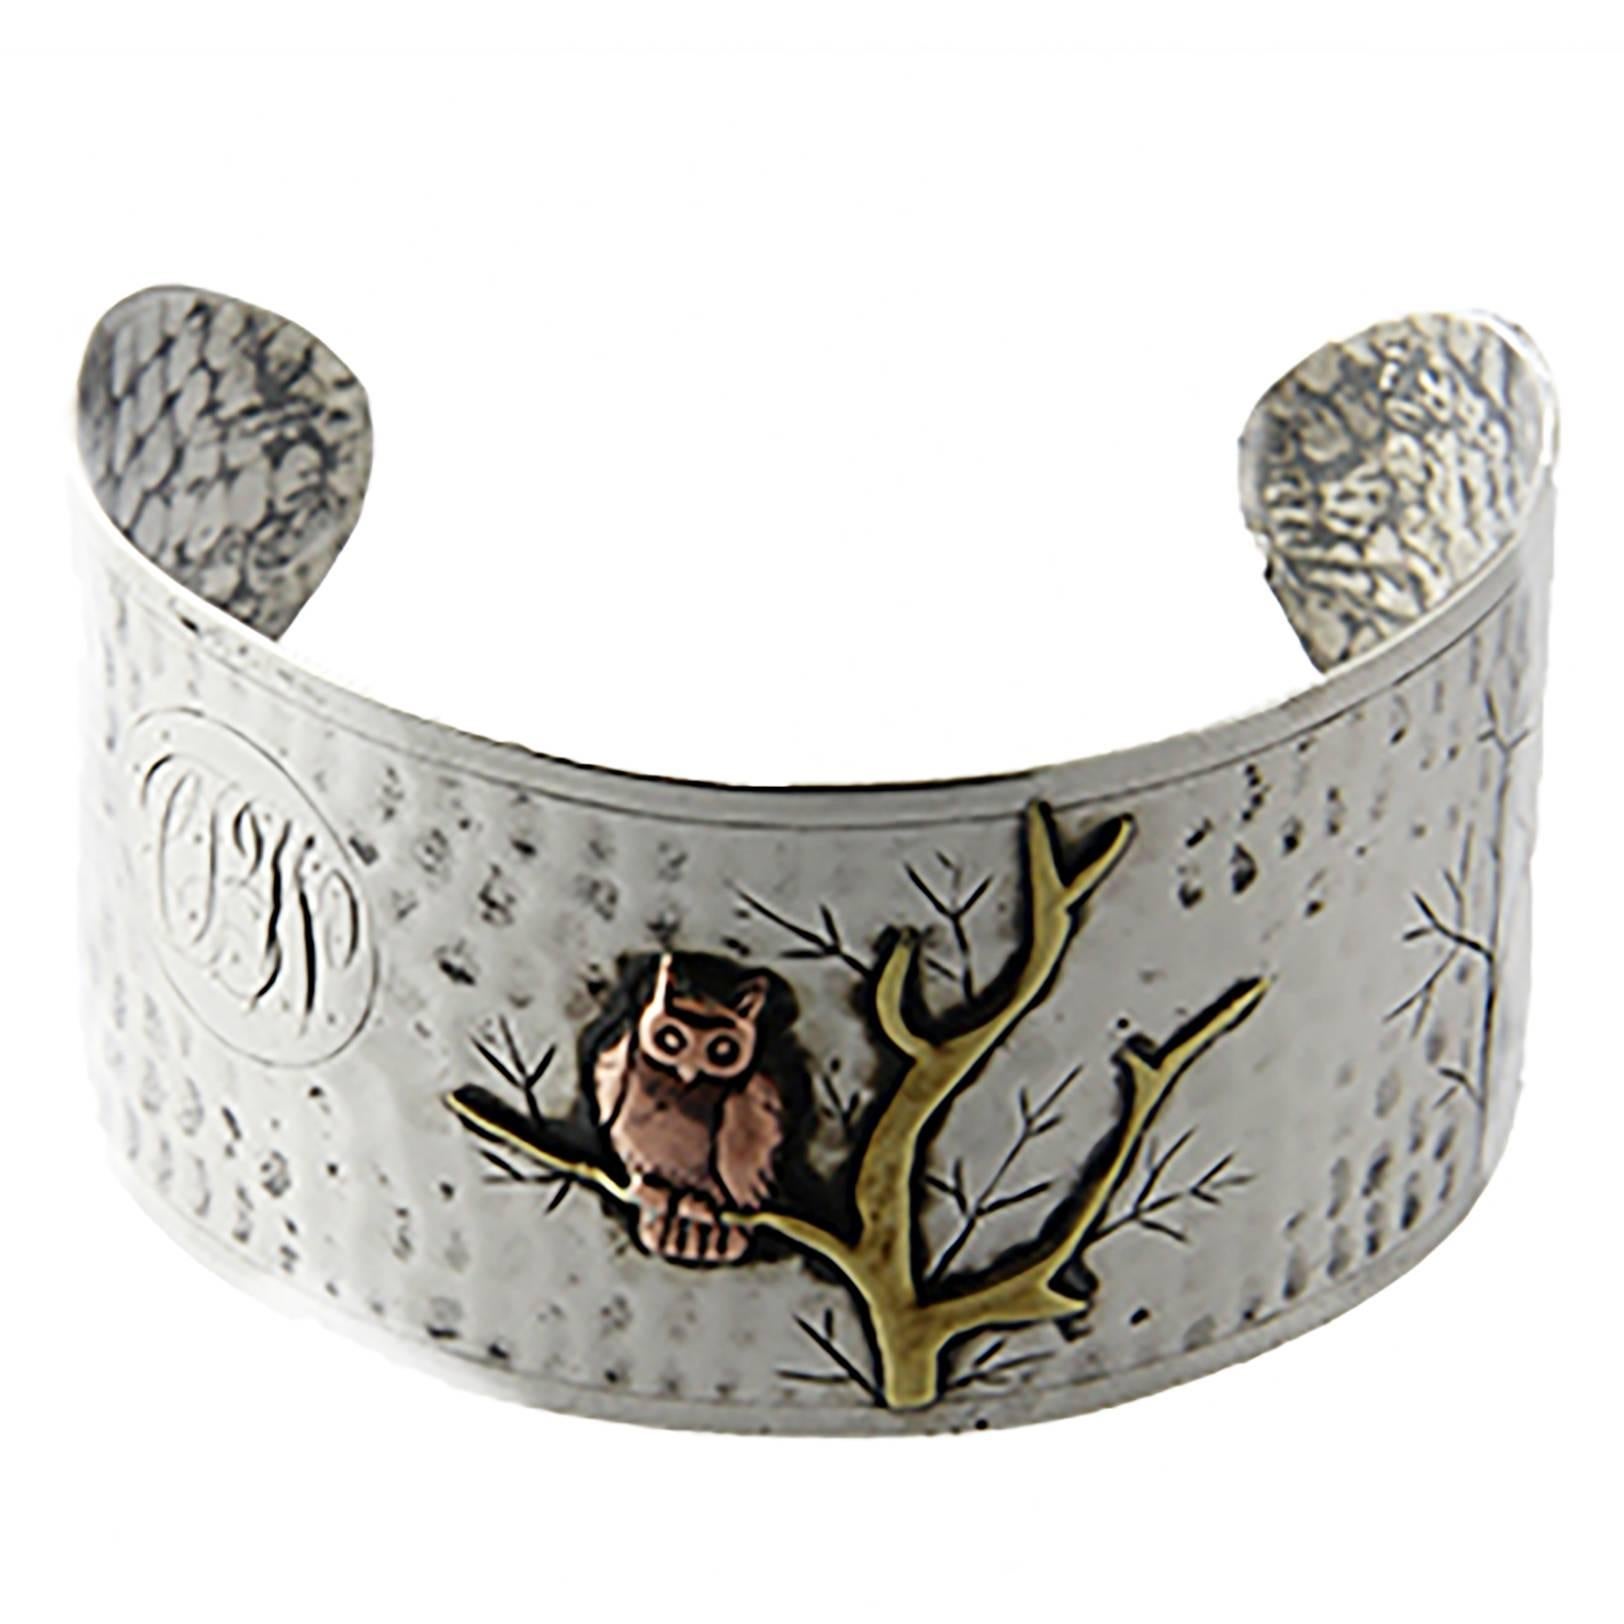 Arts & Crafts Handmade Sterling Silver and Mixed Metal Owl Cuff Bracelet